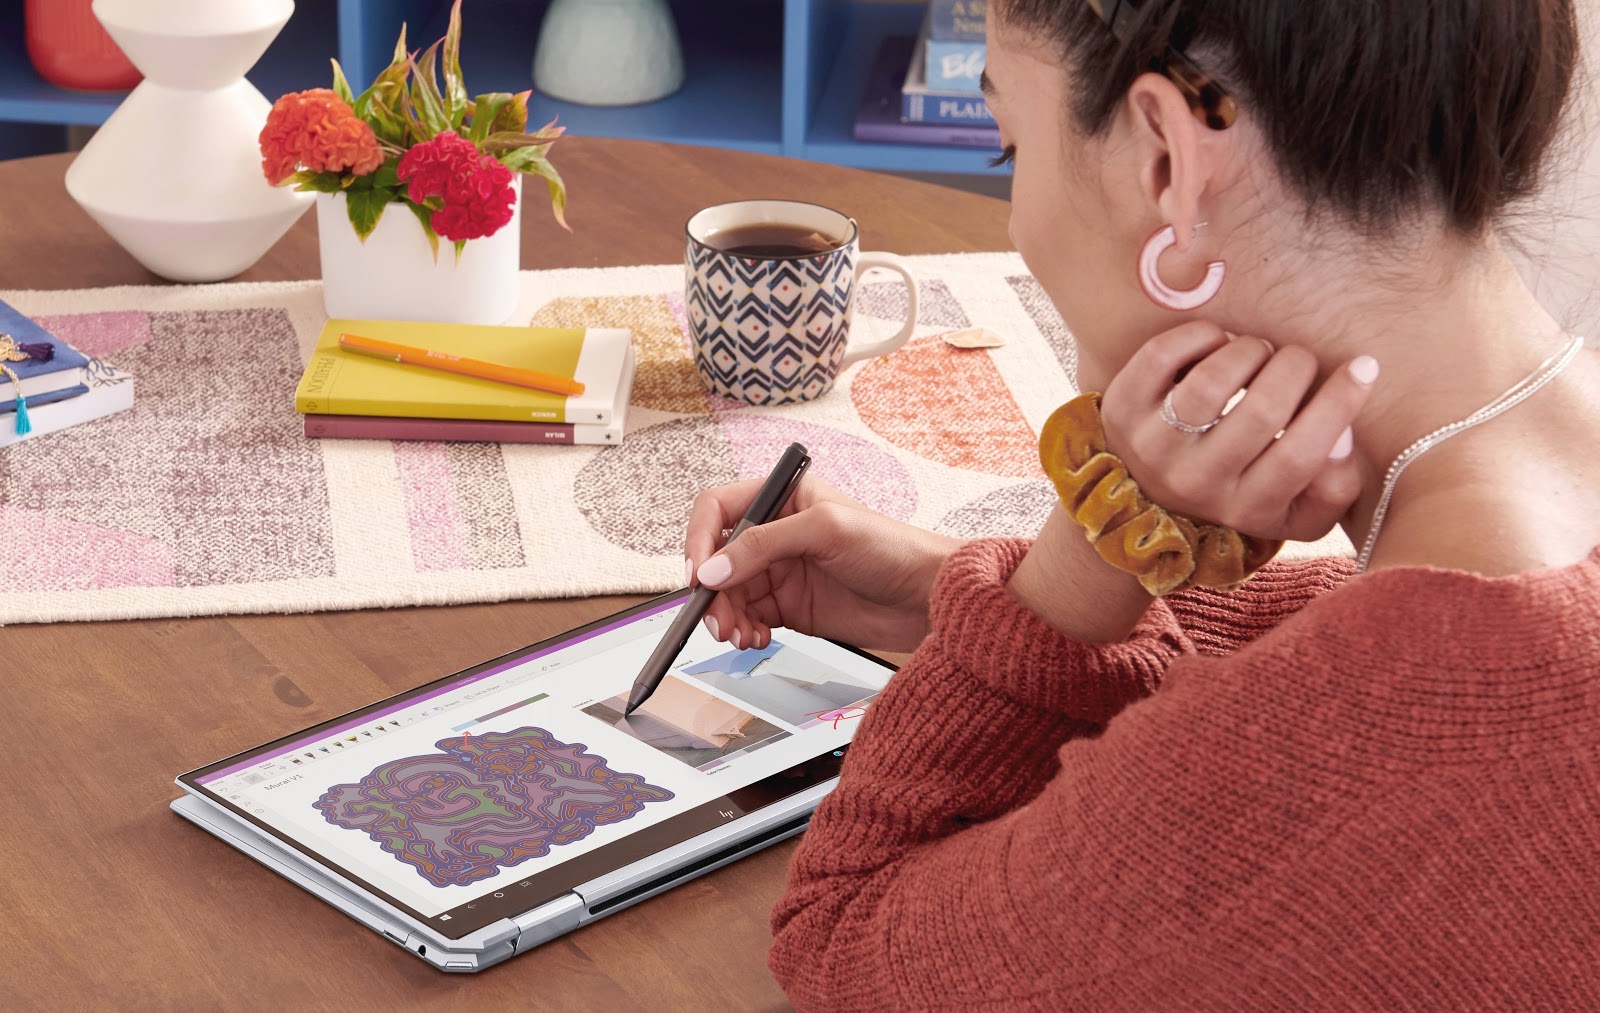 HP Intel Evo laptop being used with a digital pen.